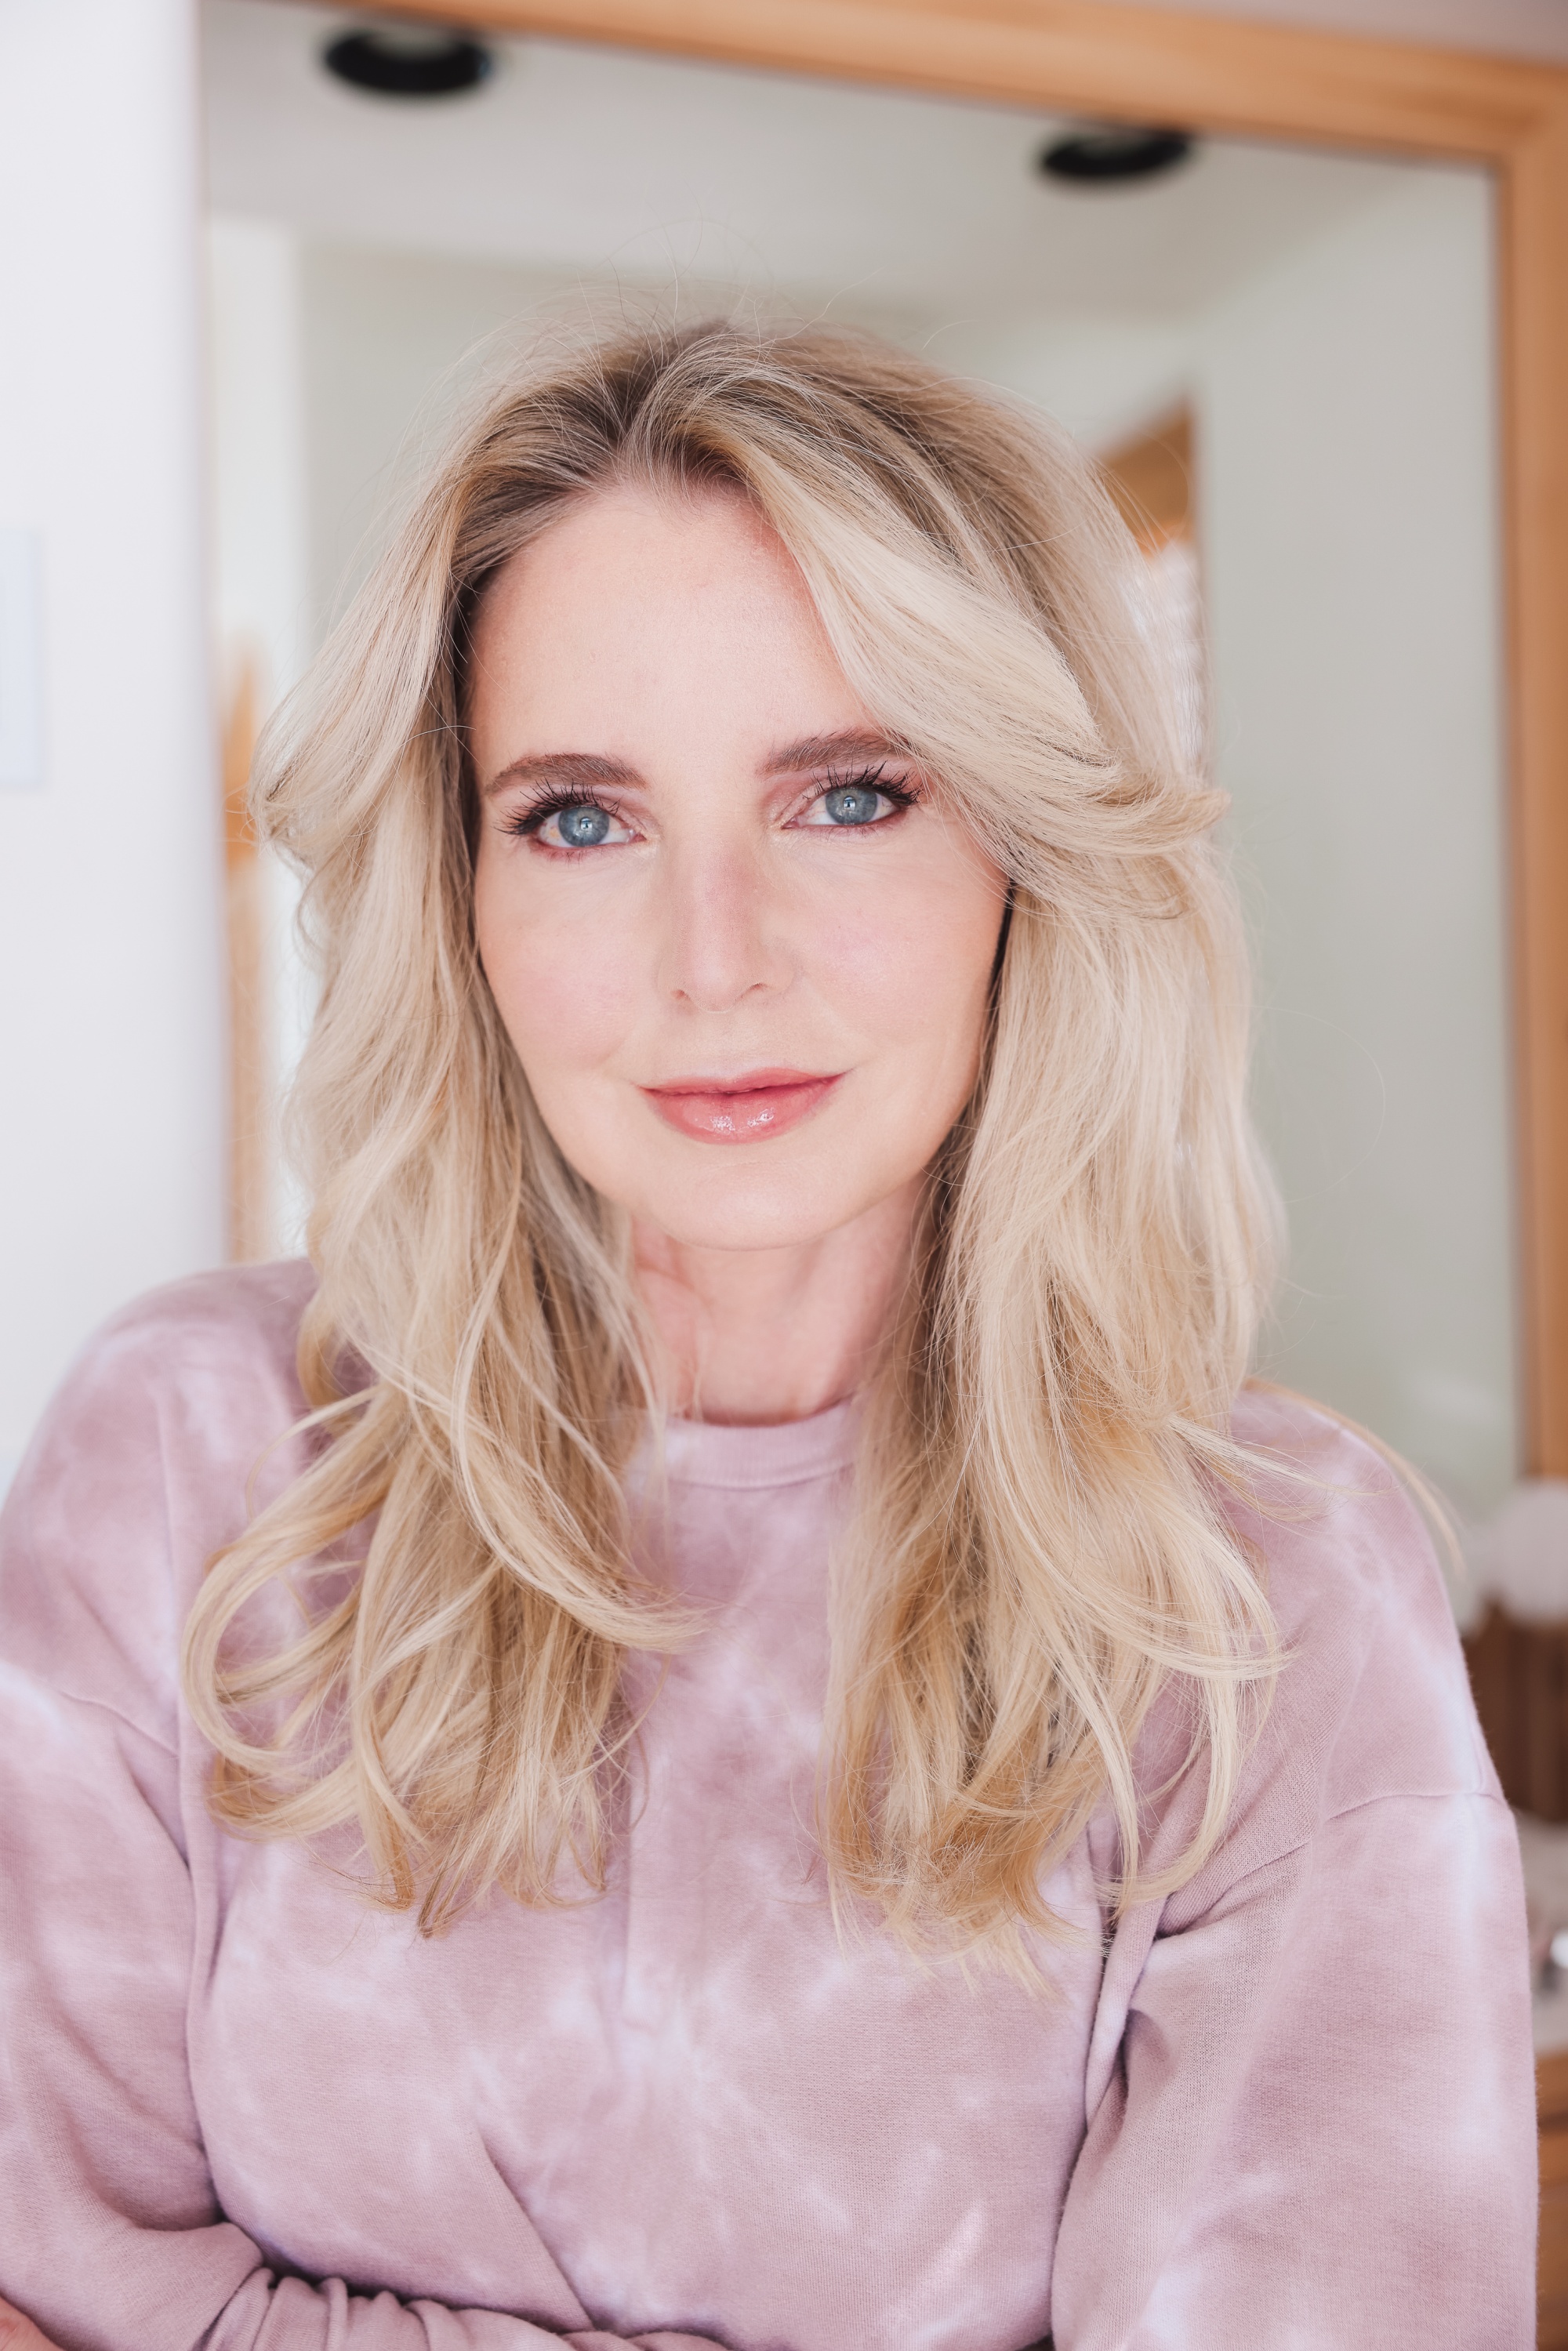 Beauty tips to look younger, beauty tips and tricks for women over 40, erin busbee, fashion blogger over 40, beauty blogger over 40, telluride, co